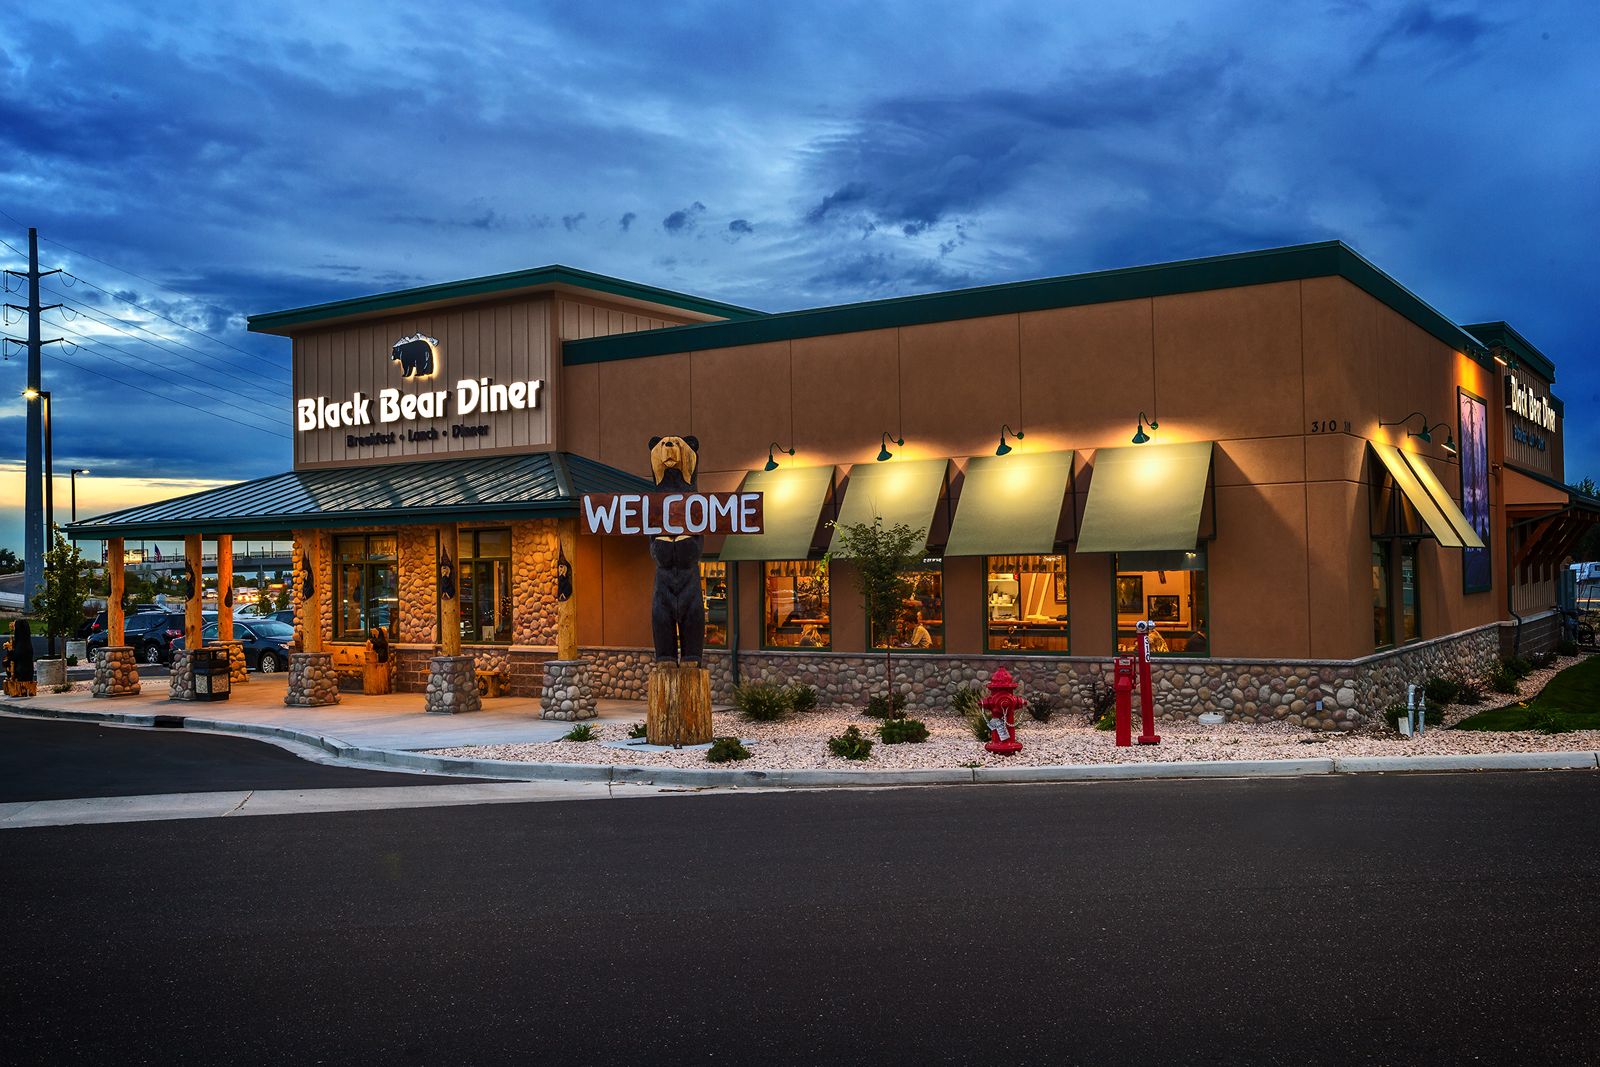 Black Bear Diner Announces Plans To Expand Its Presence in Texas With Six Corporate Openings Expected for 2022